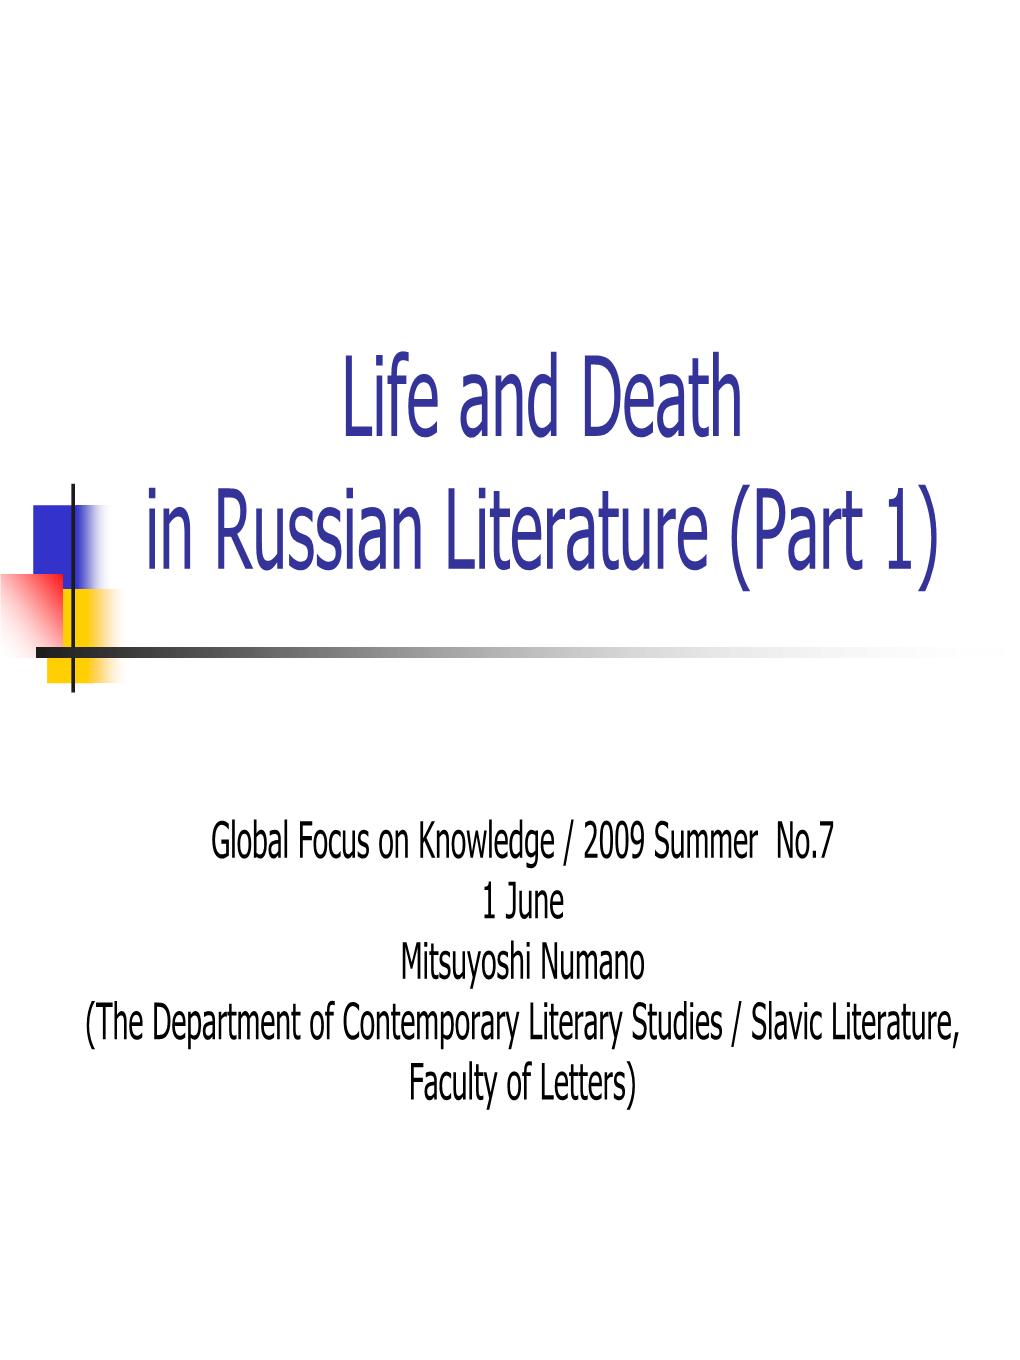 Life and Death in Russian Literature (Part 1)